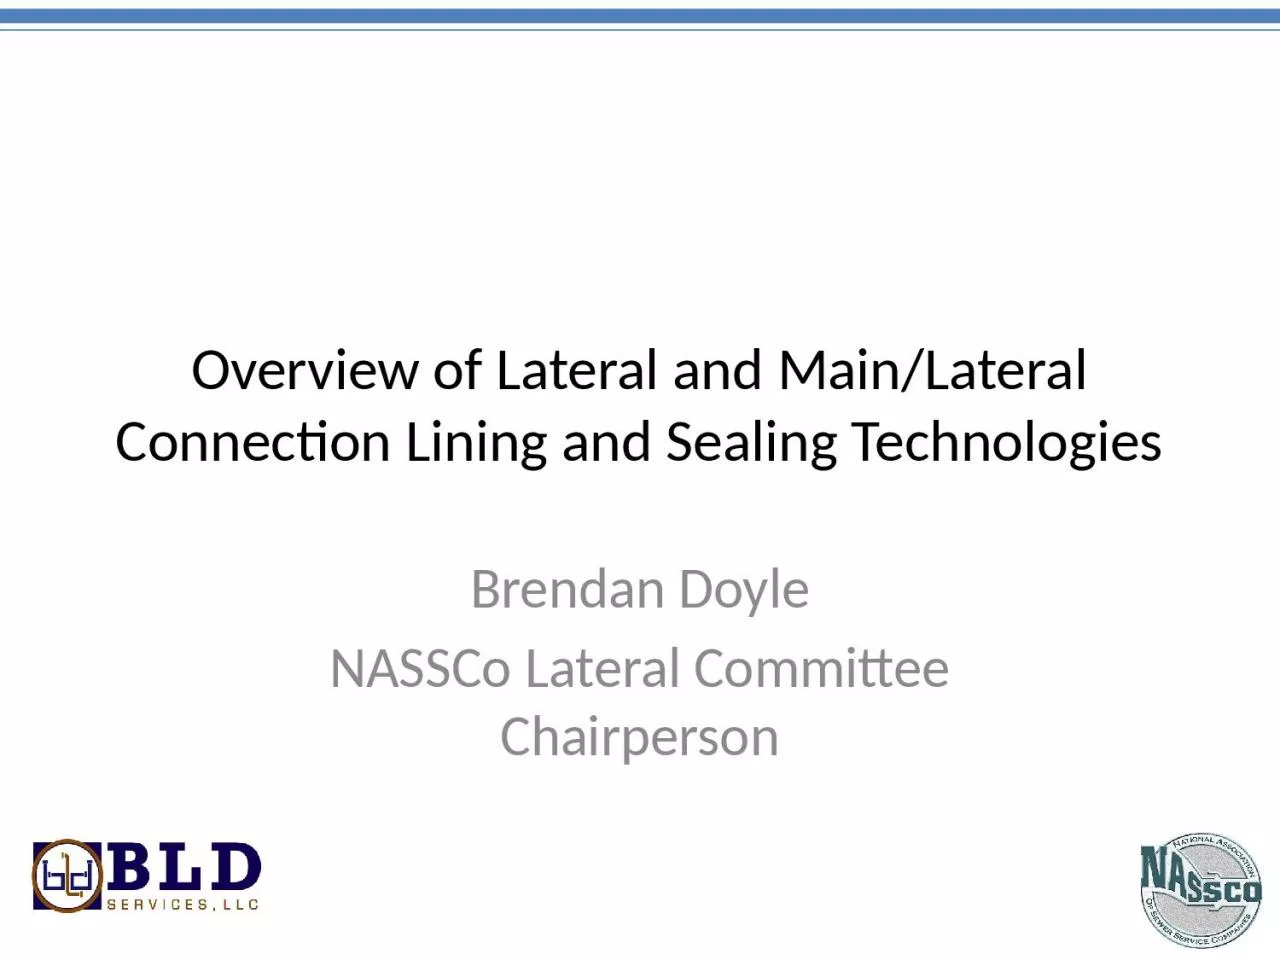 Overview of Lateral and Main/Lateral Connection Lining and Sealing Technologies